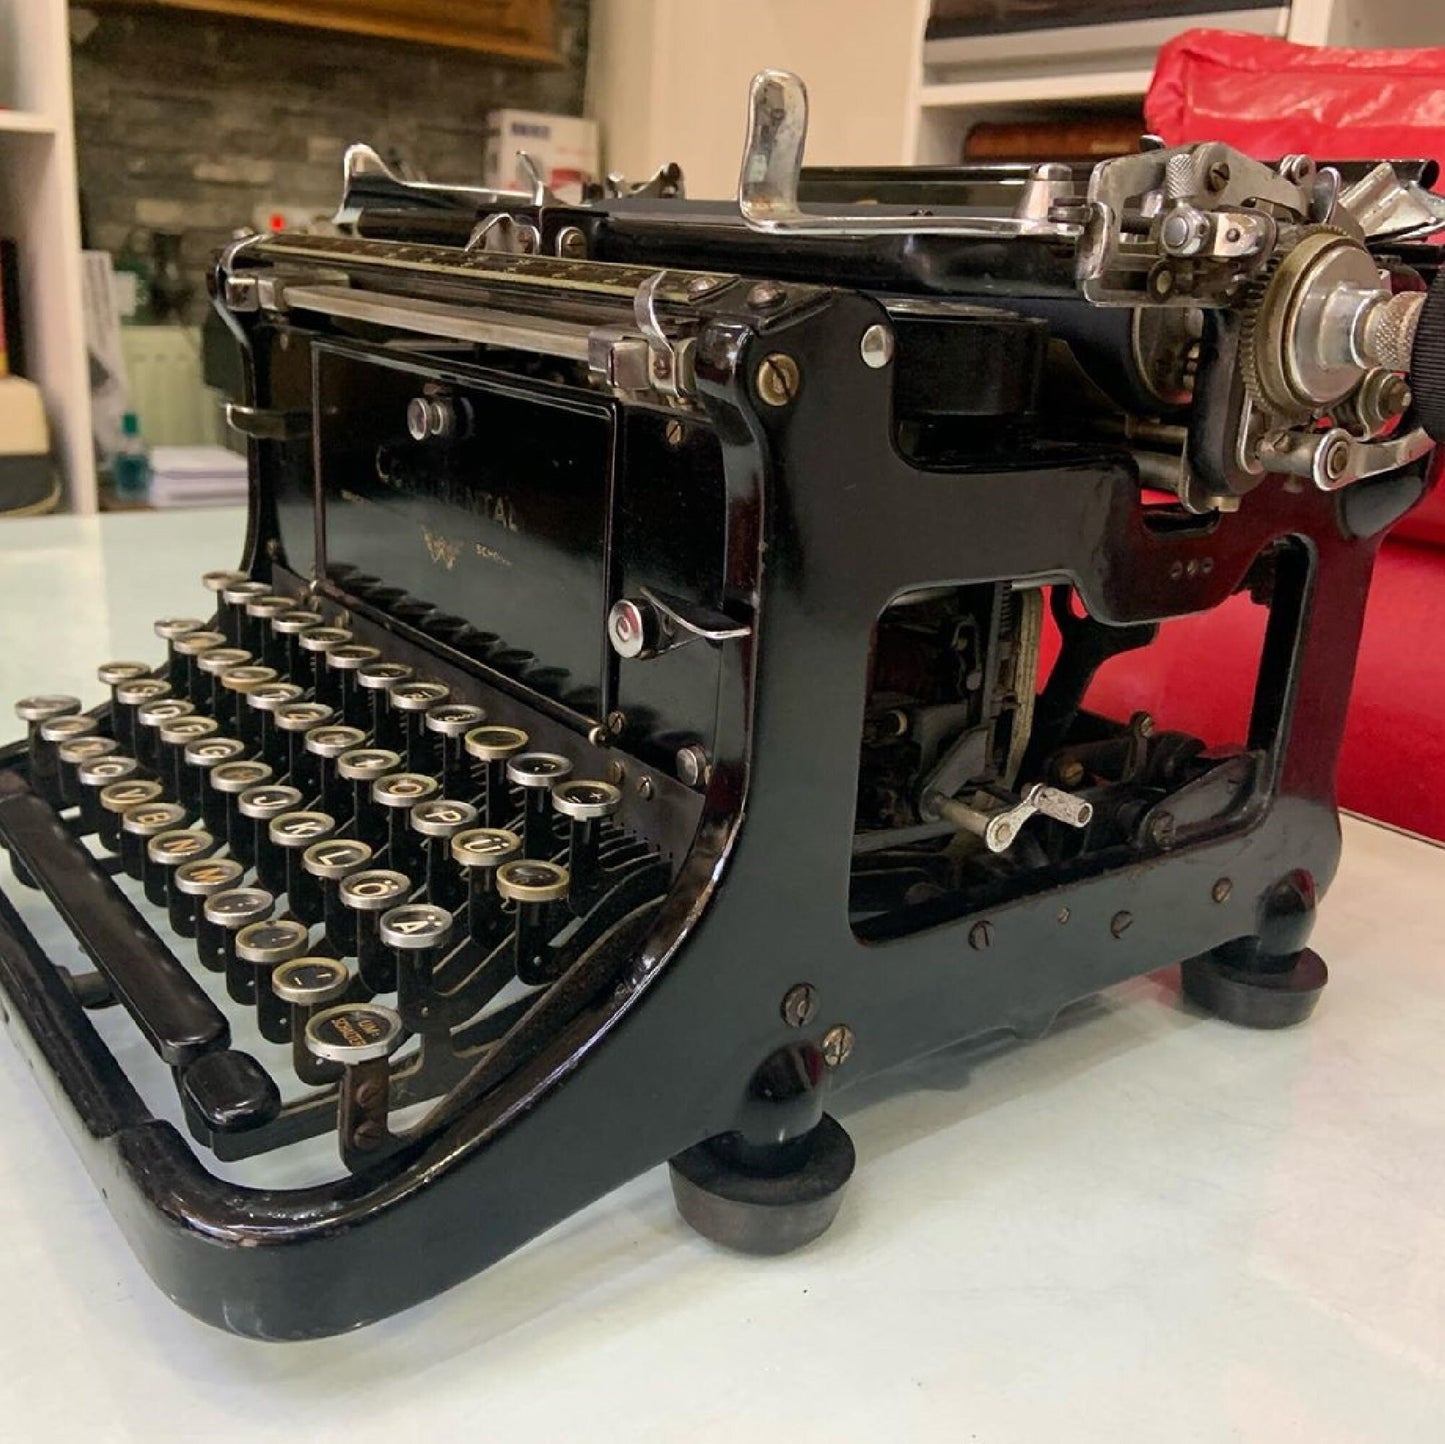 Continental Office Typewriter - A Working Antique, Vintage Elegance for Your Workspace